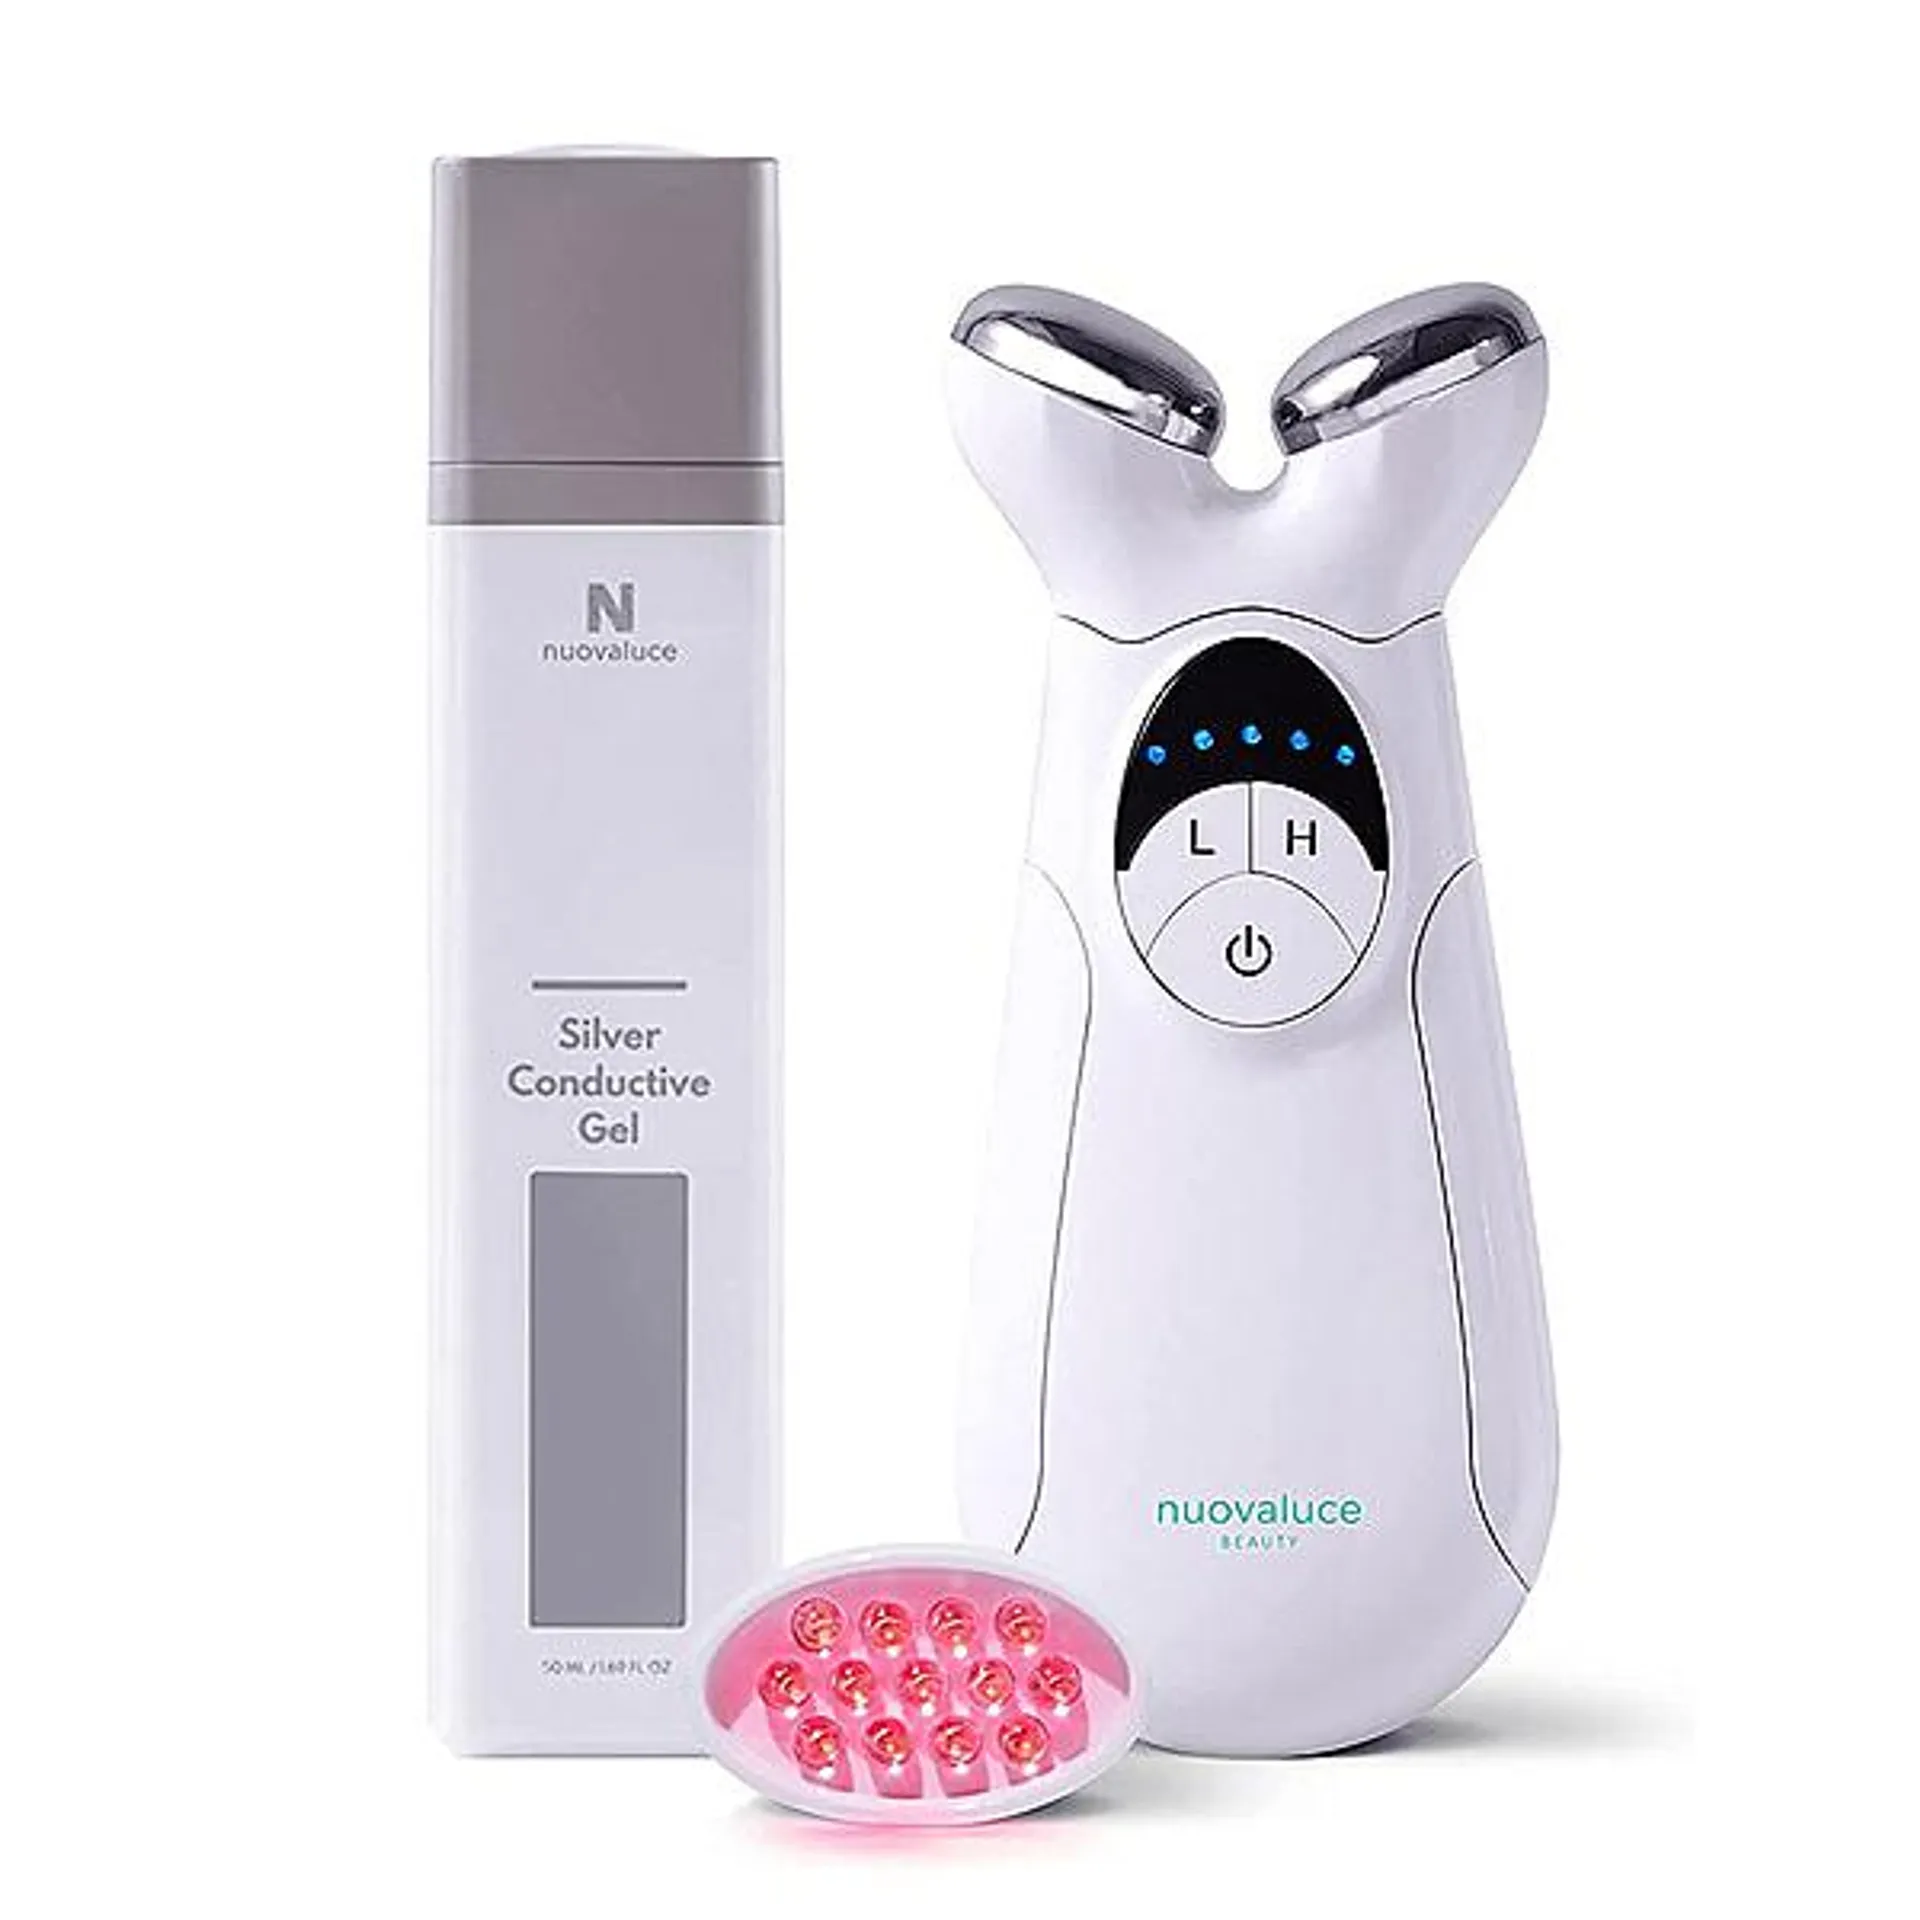 Nuovaluce Anti Aging Device with Conductive Gel